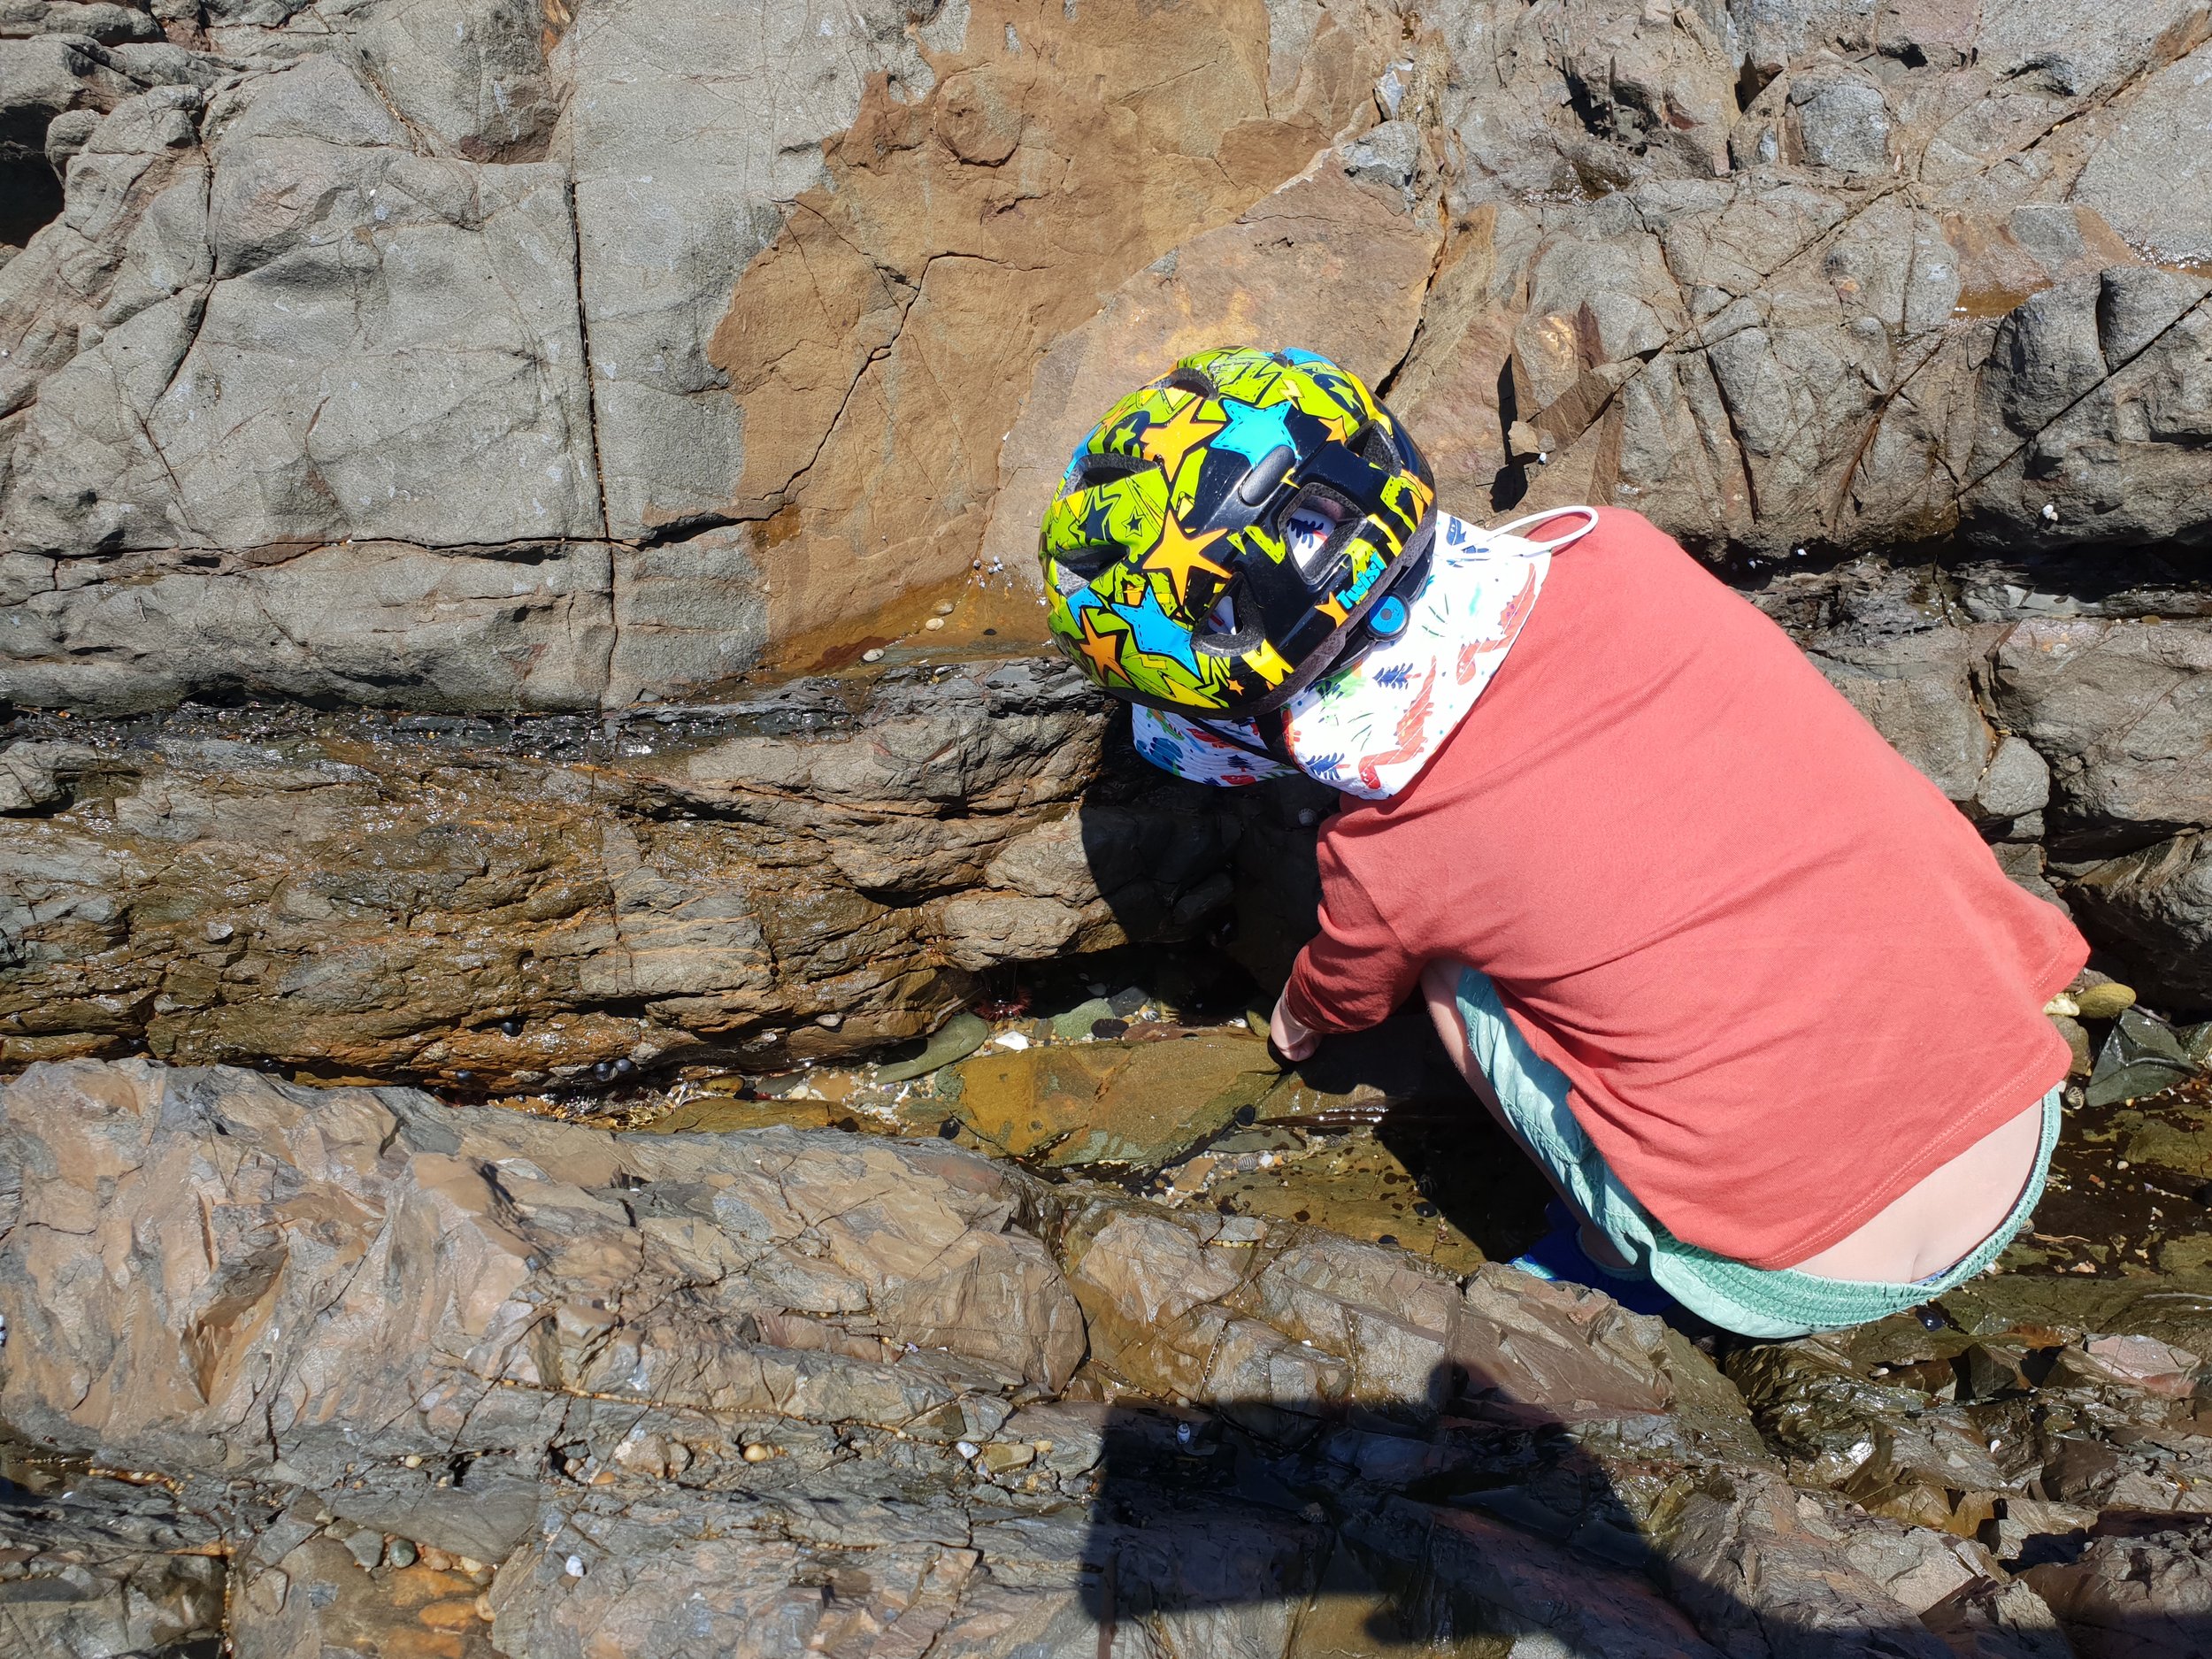 Endless entertainment of rockpools